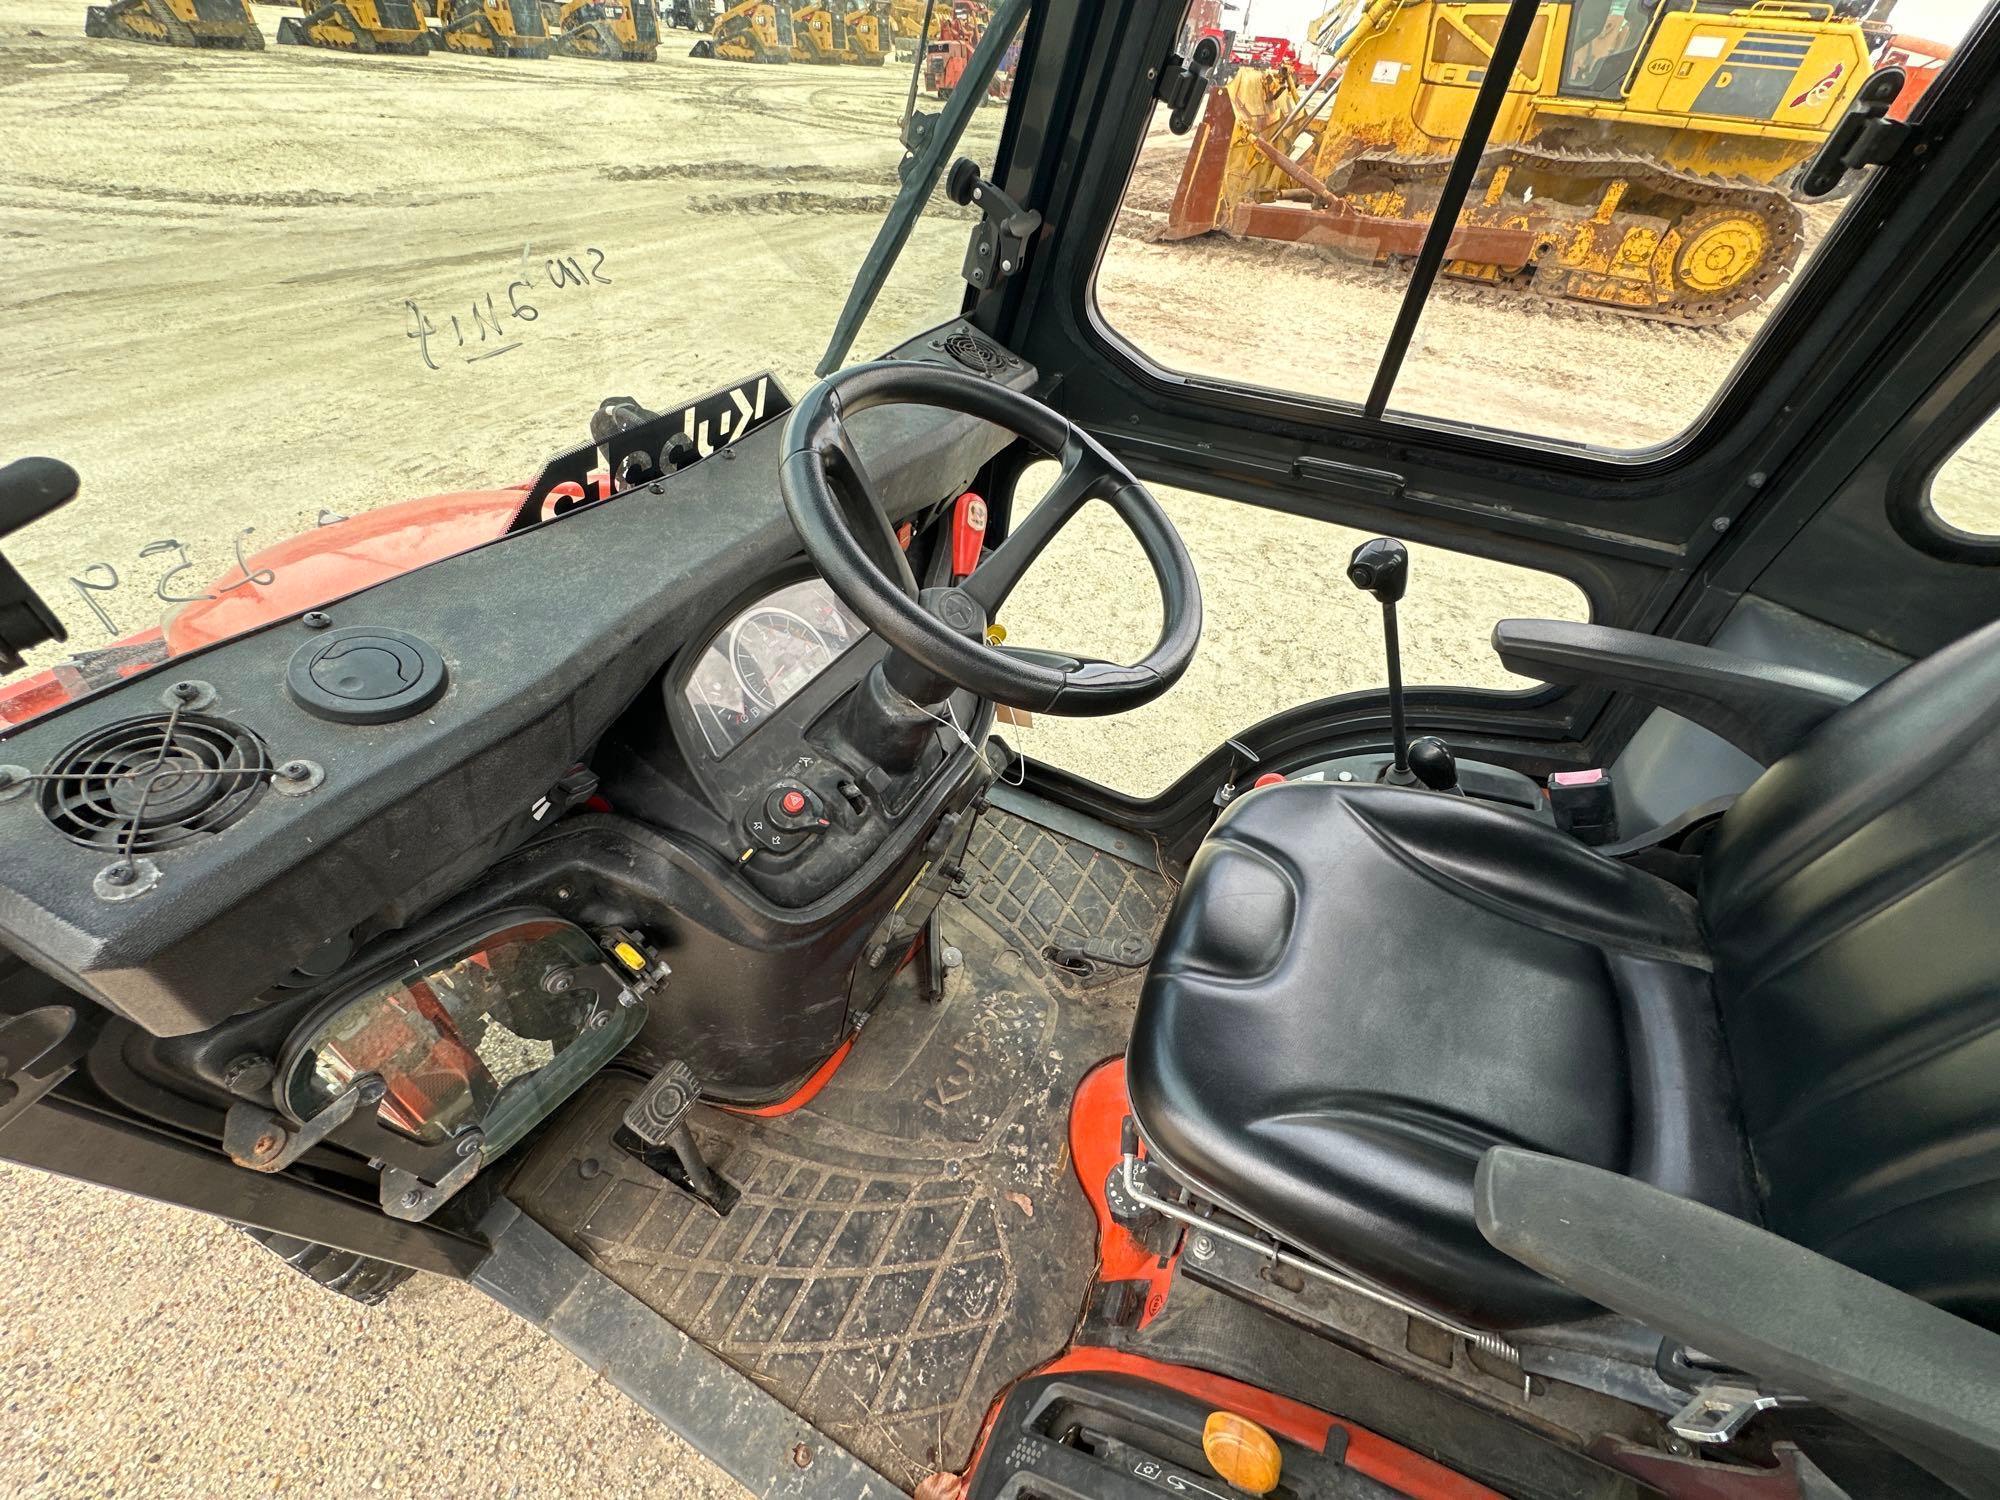 KUBOTA BX23SLB-R TRACTOR LOADER BACKHOE SN:21114 powered by diesel engine, equipped with EROPS, GP